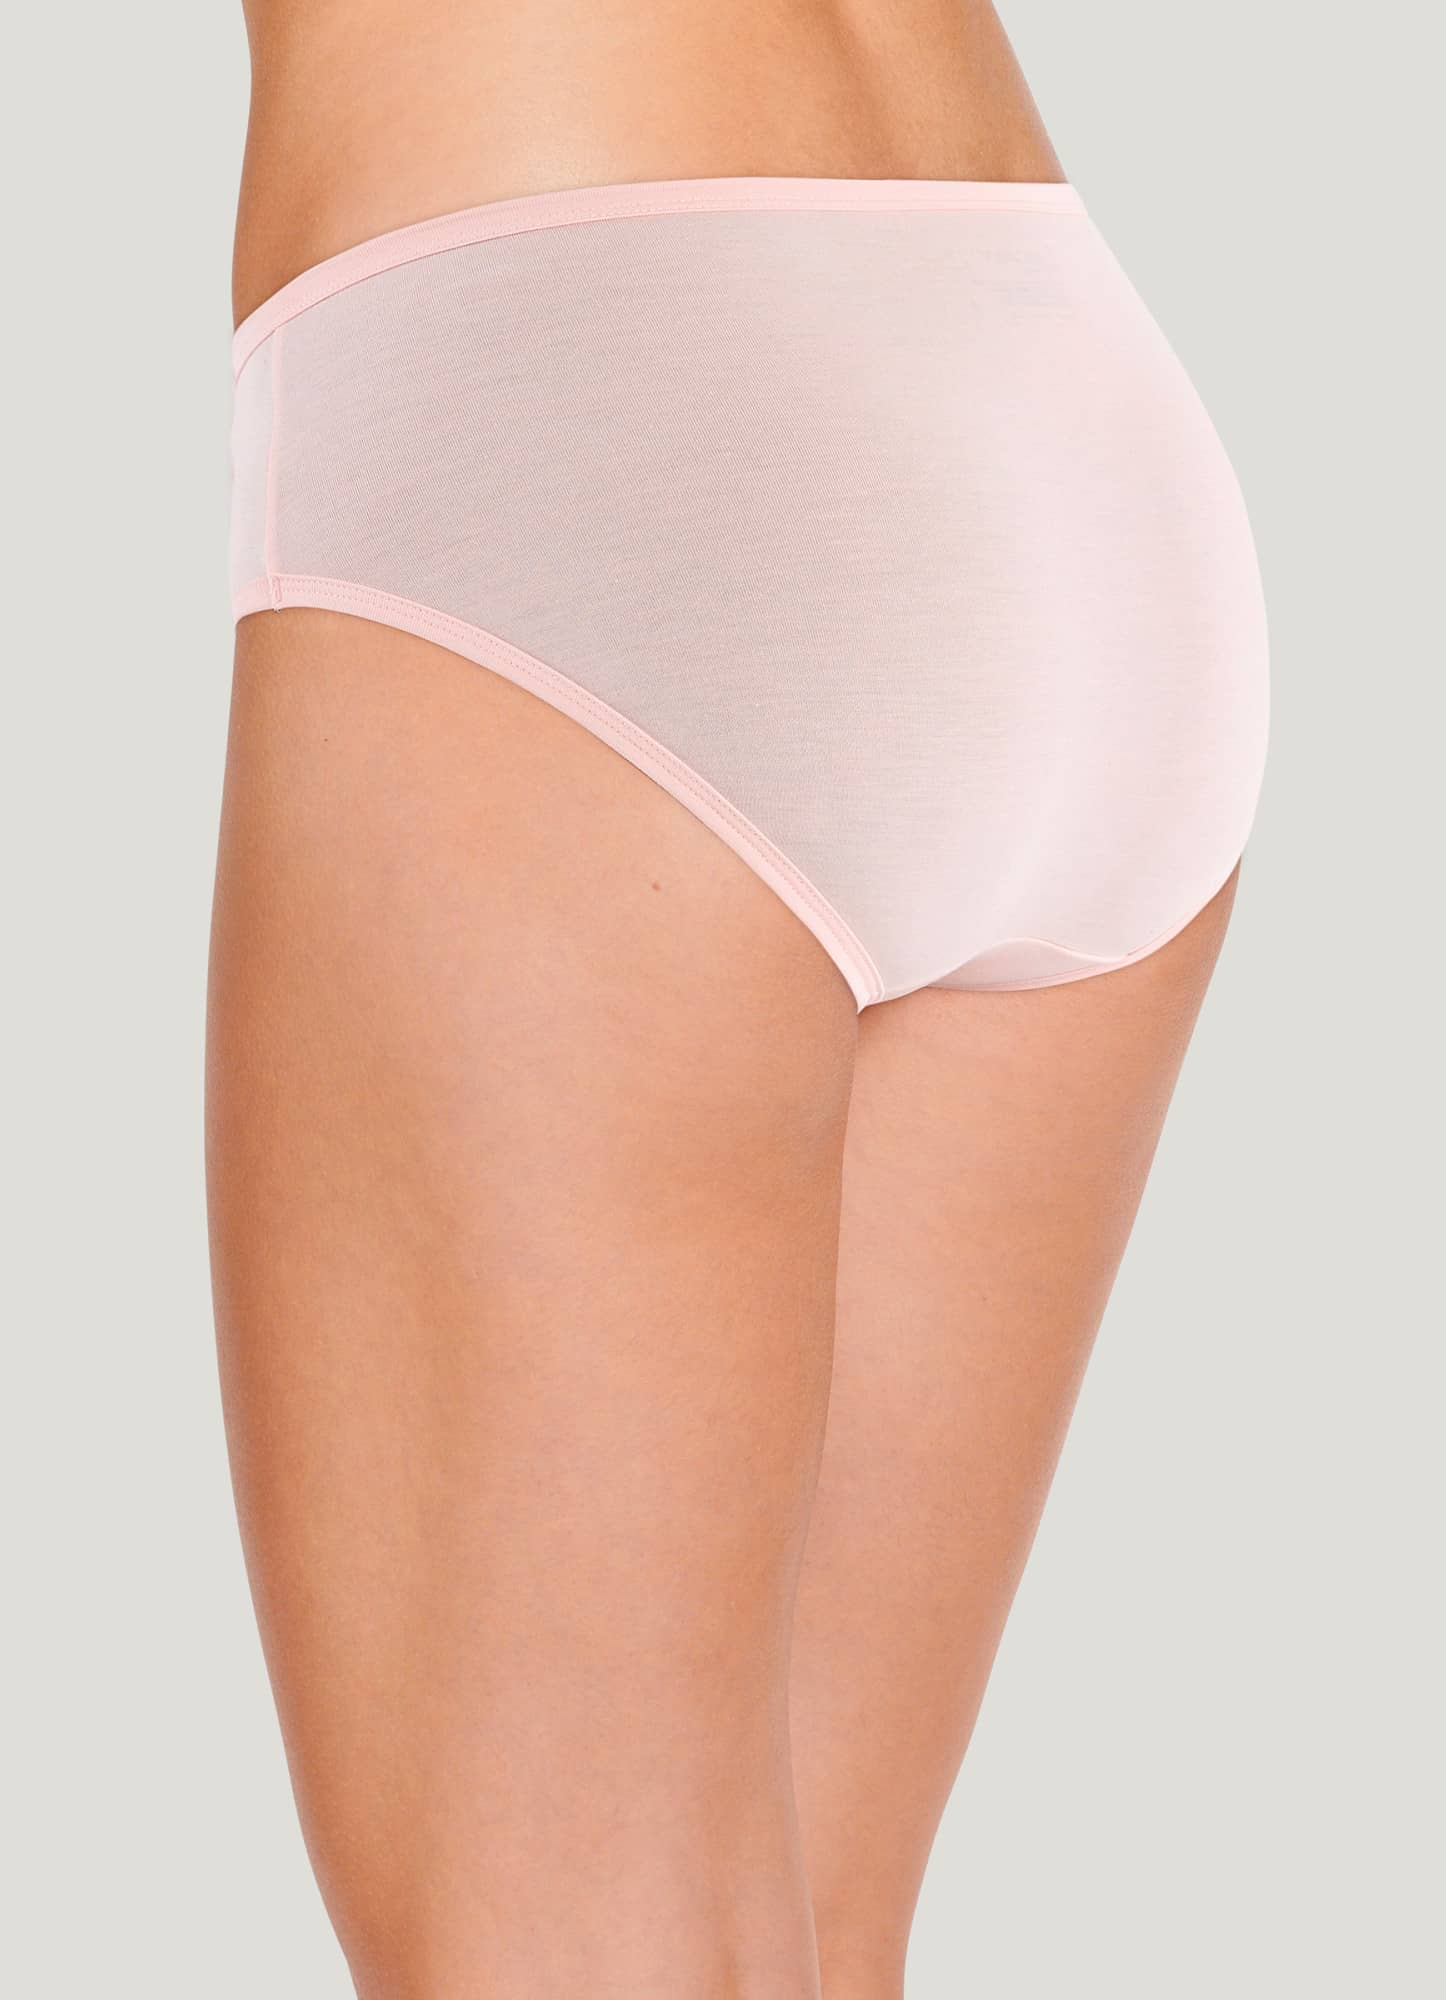 Jockey Women's SIZE 8 Supersoft French Cut Panties 3-PACK Pink #60723 for  sale online